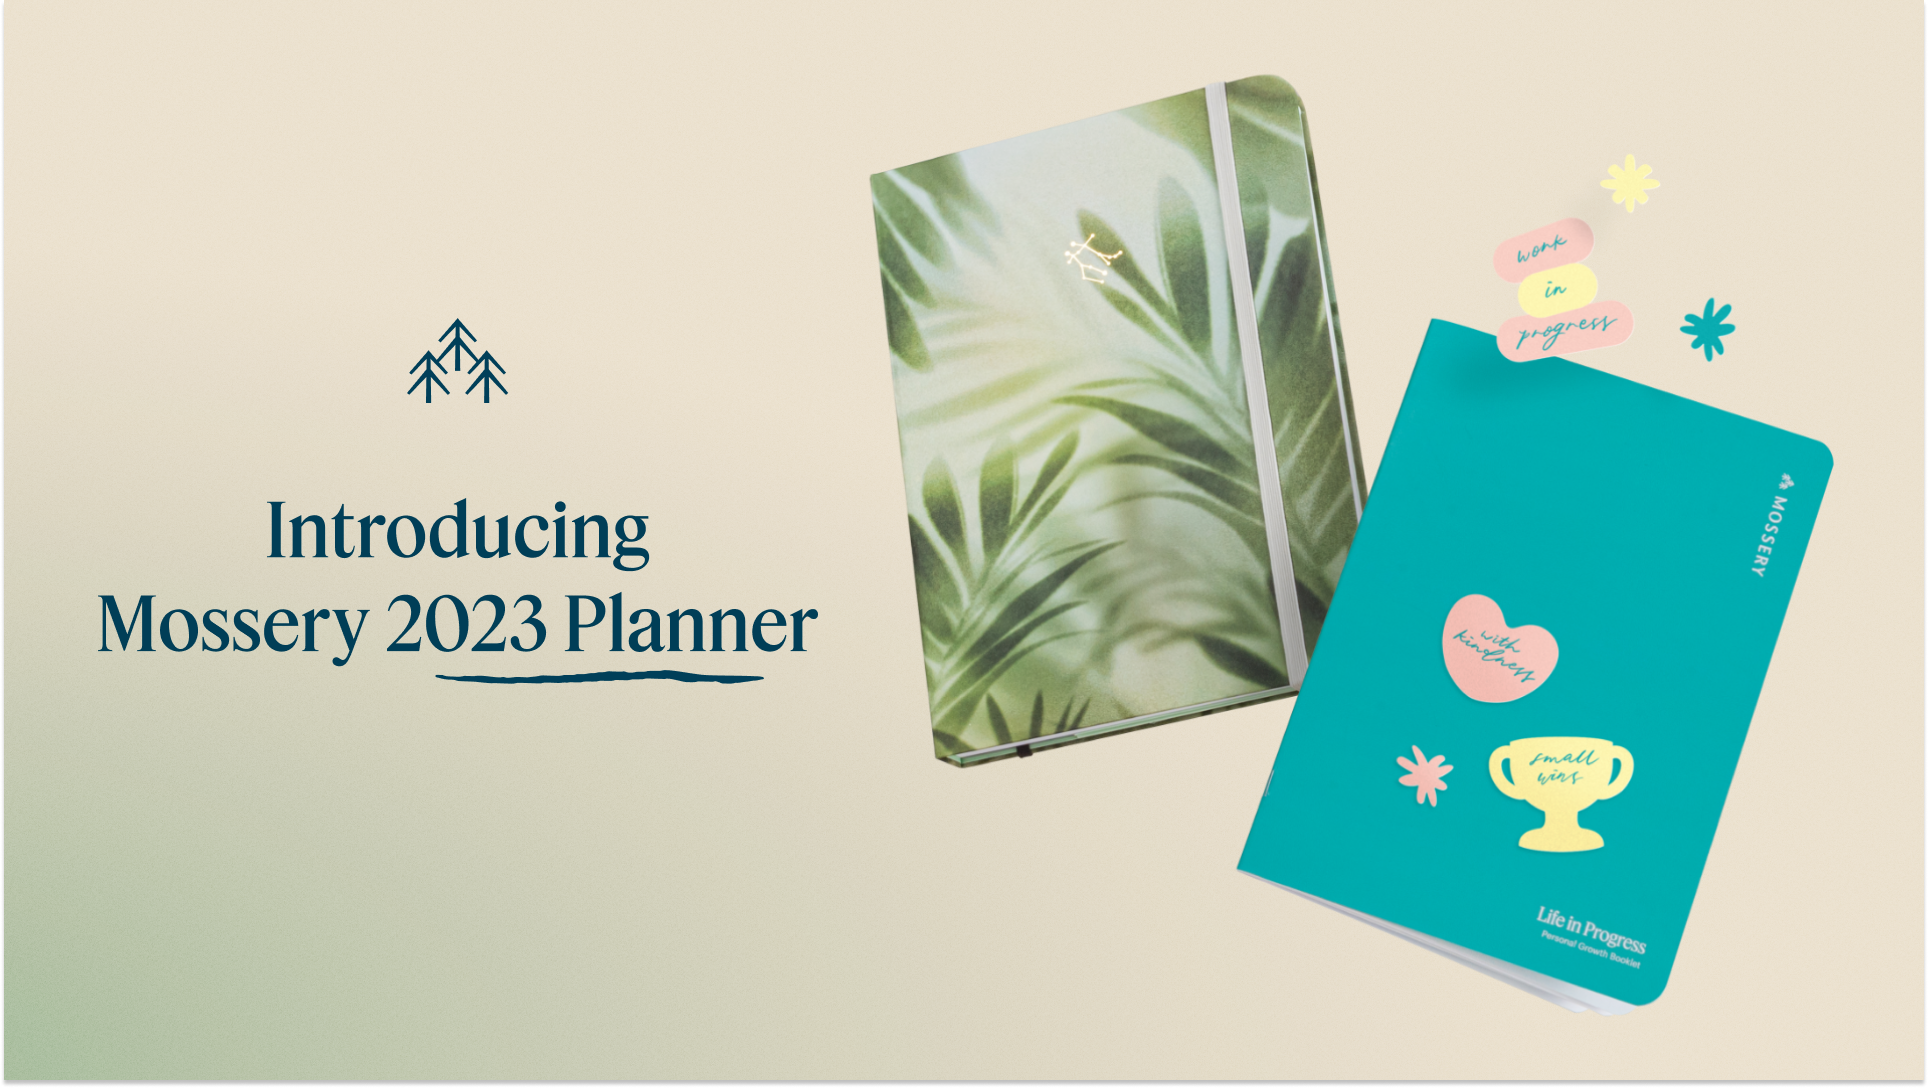 What's New About the Mossery 2023 Planner? 😉